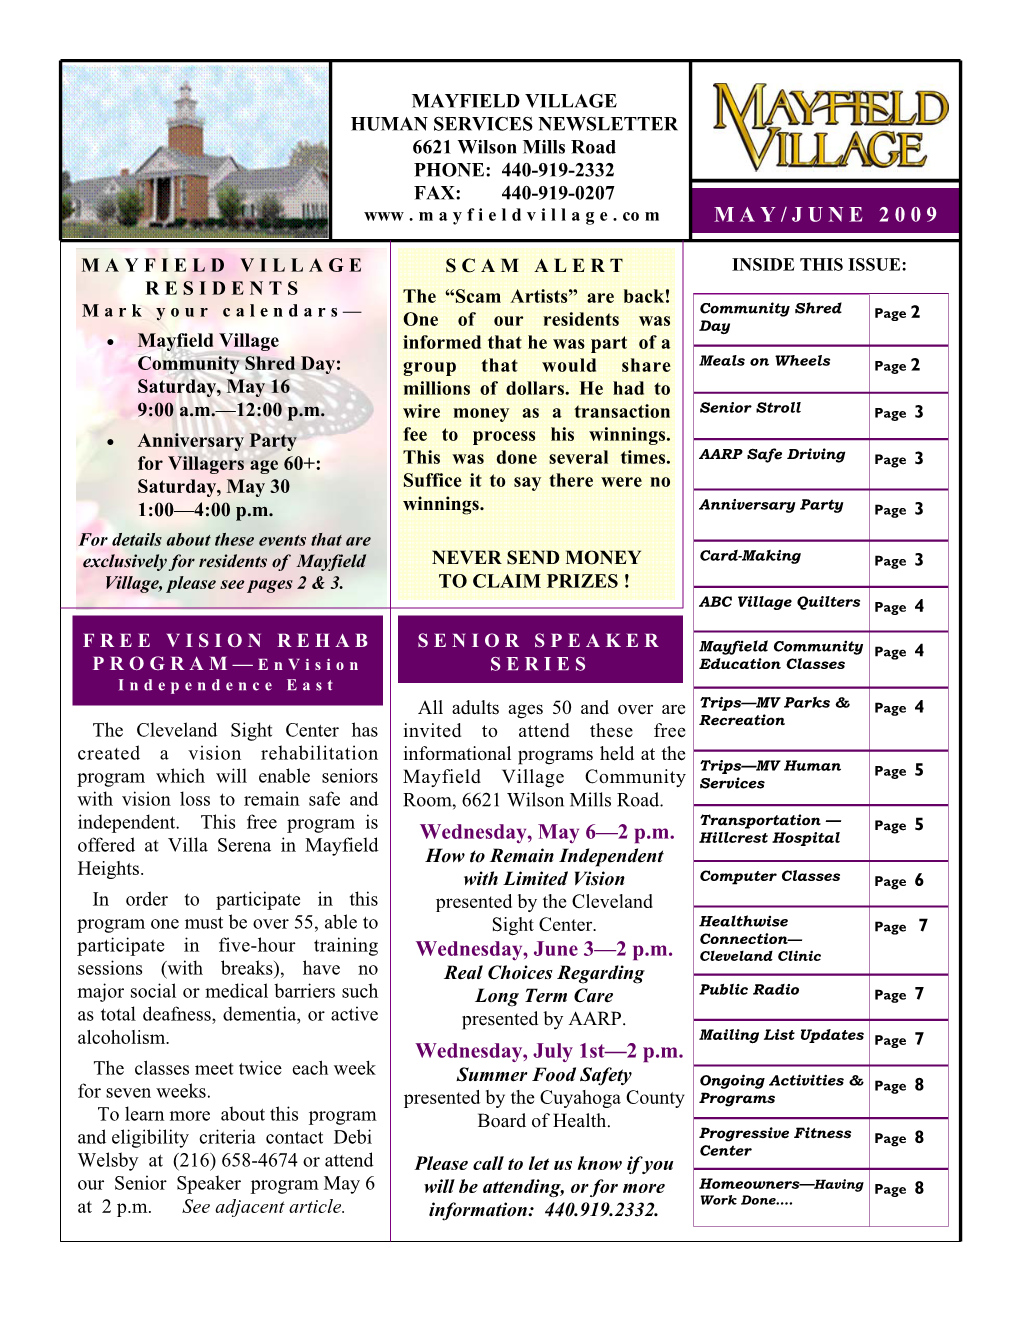 Updated 04 27 and 4 20 and 04 15 09 U 4 17 May June 2009 Hsd Newsletter